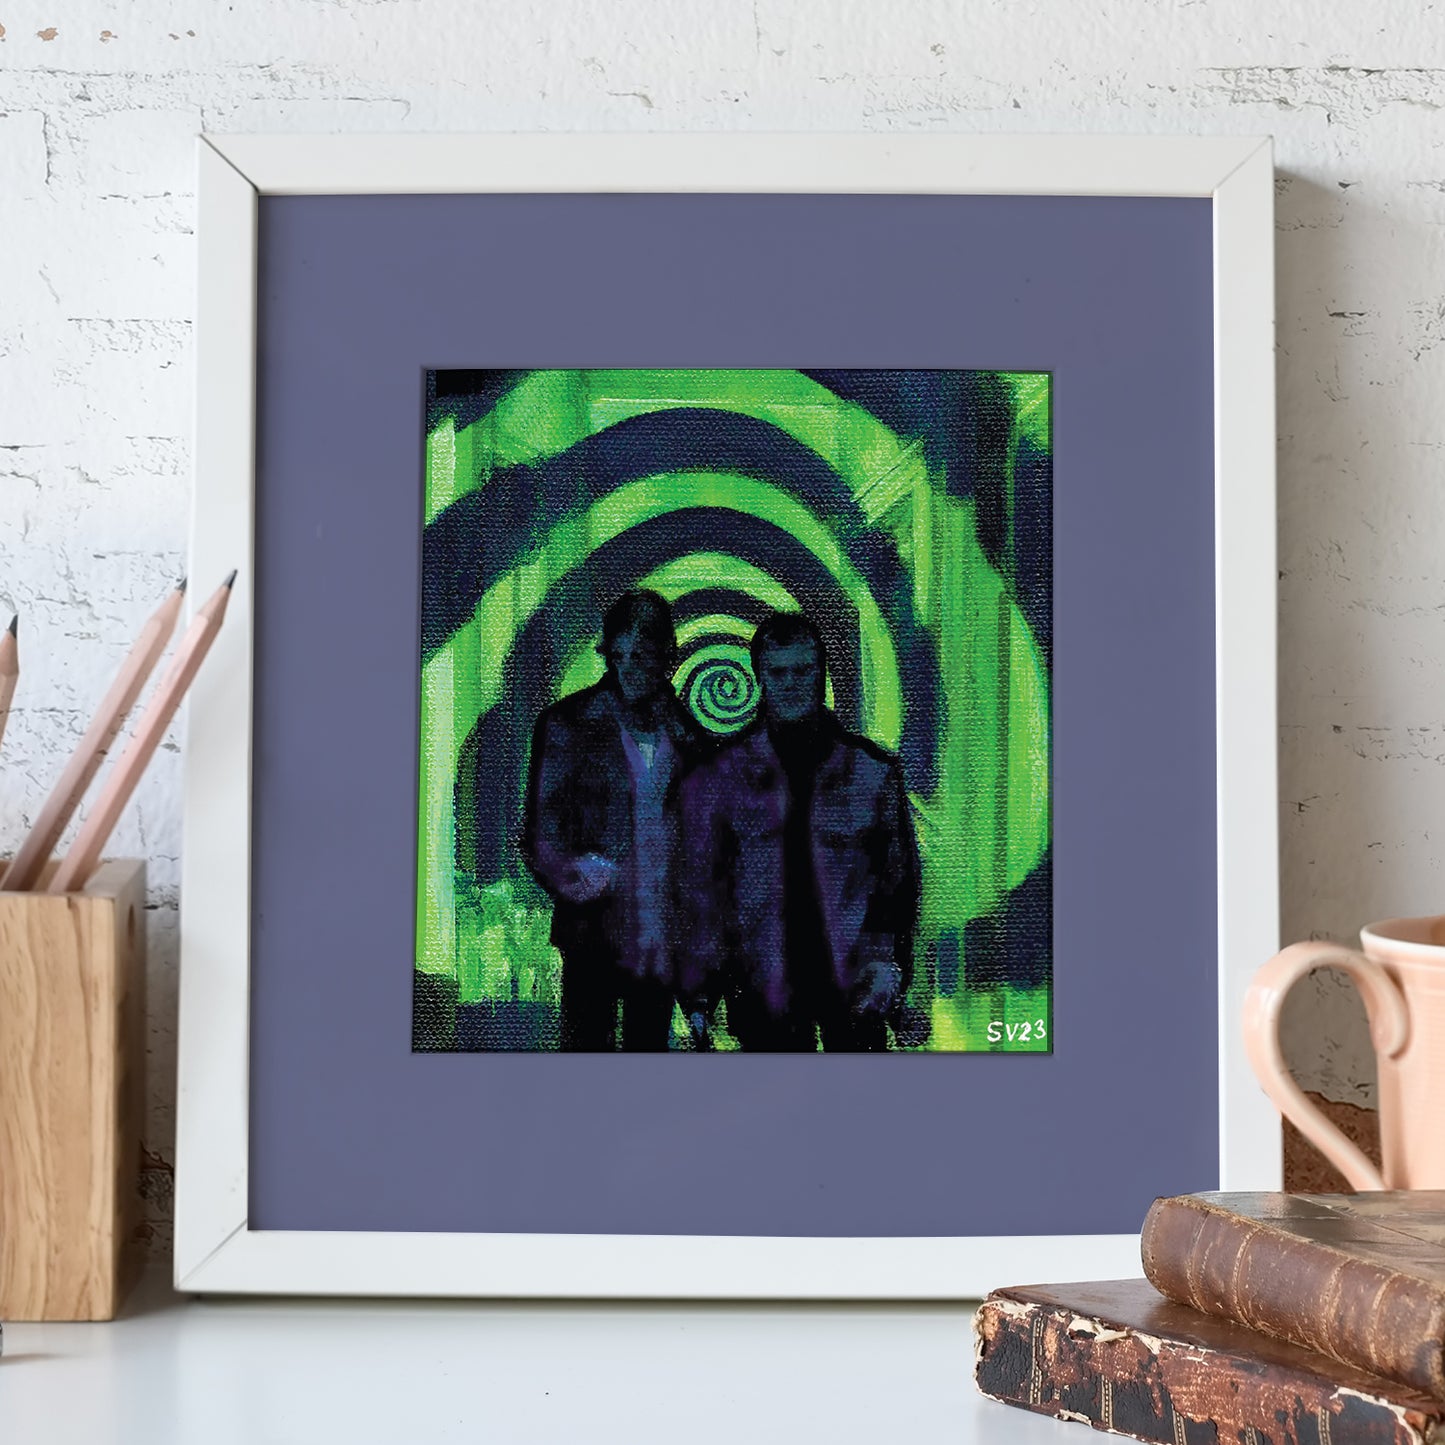 A painting mounted on a blue background in a white frame. The painting shows Sam and Dean Winchester against a green and black spiral from The Mystery Spot. Behind the painting is a white brick wall.